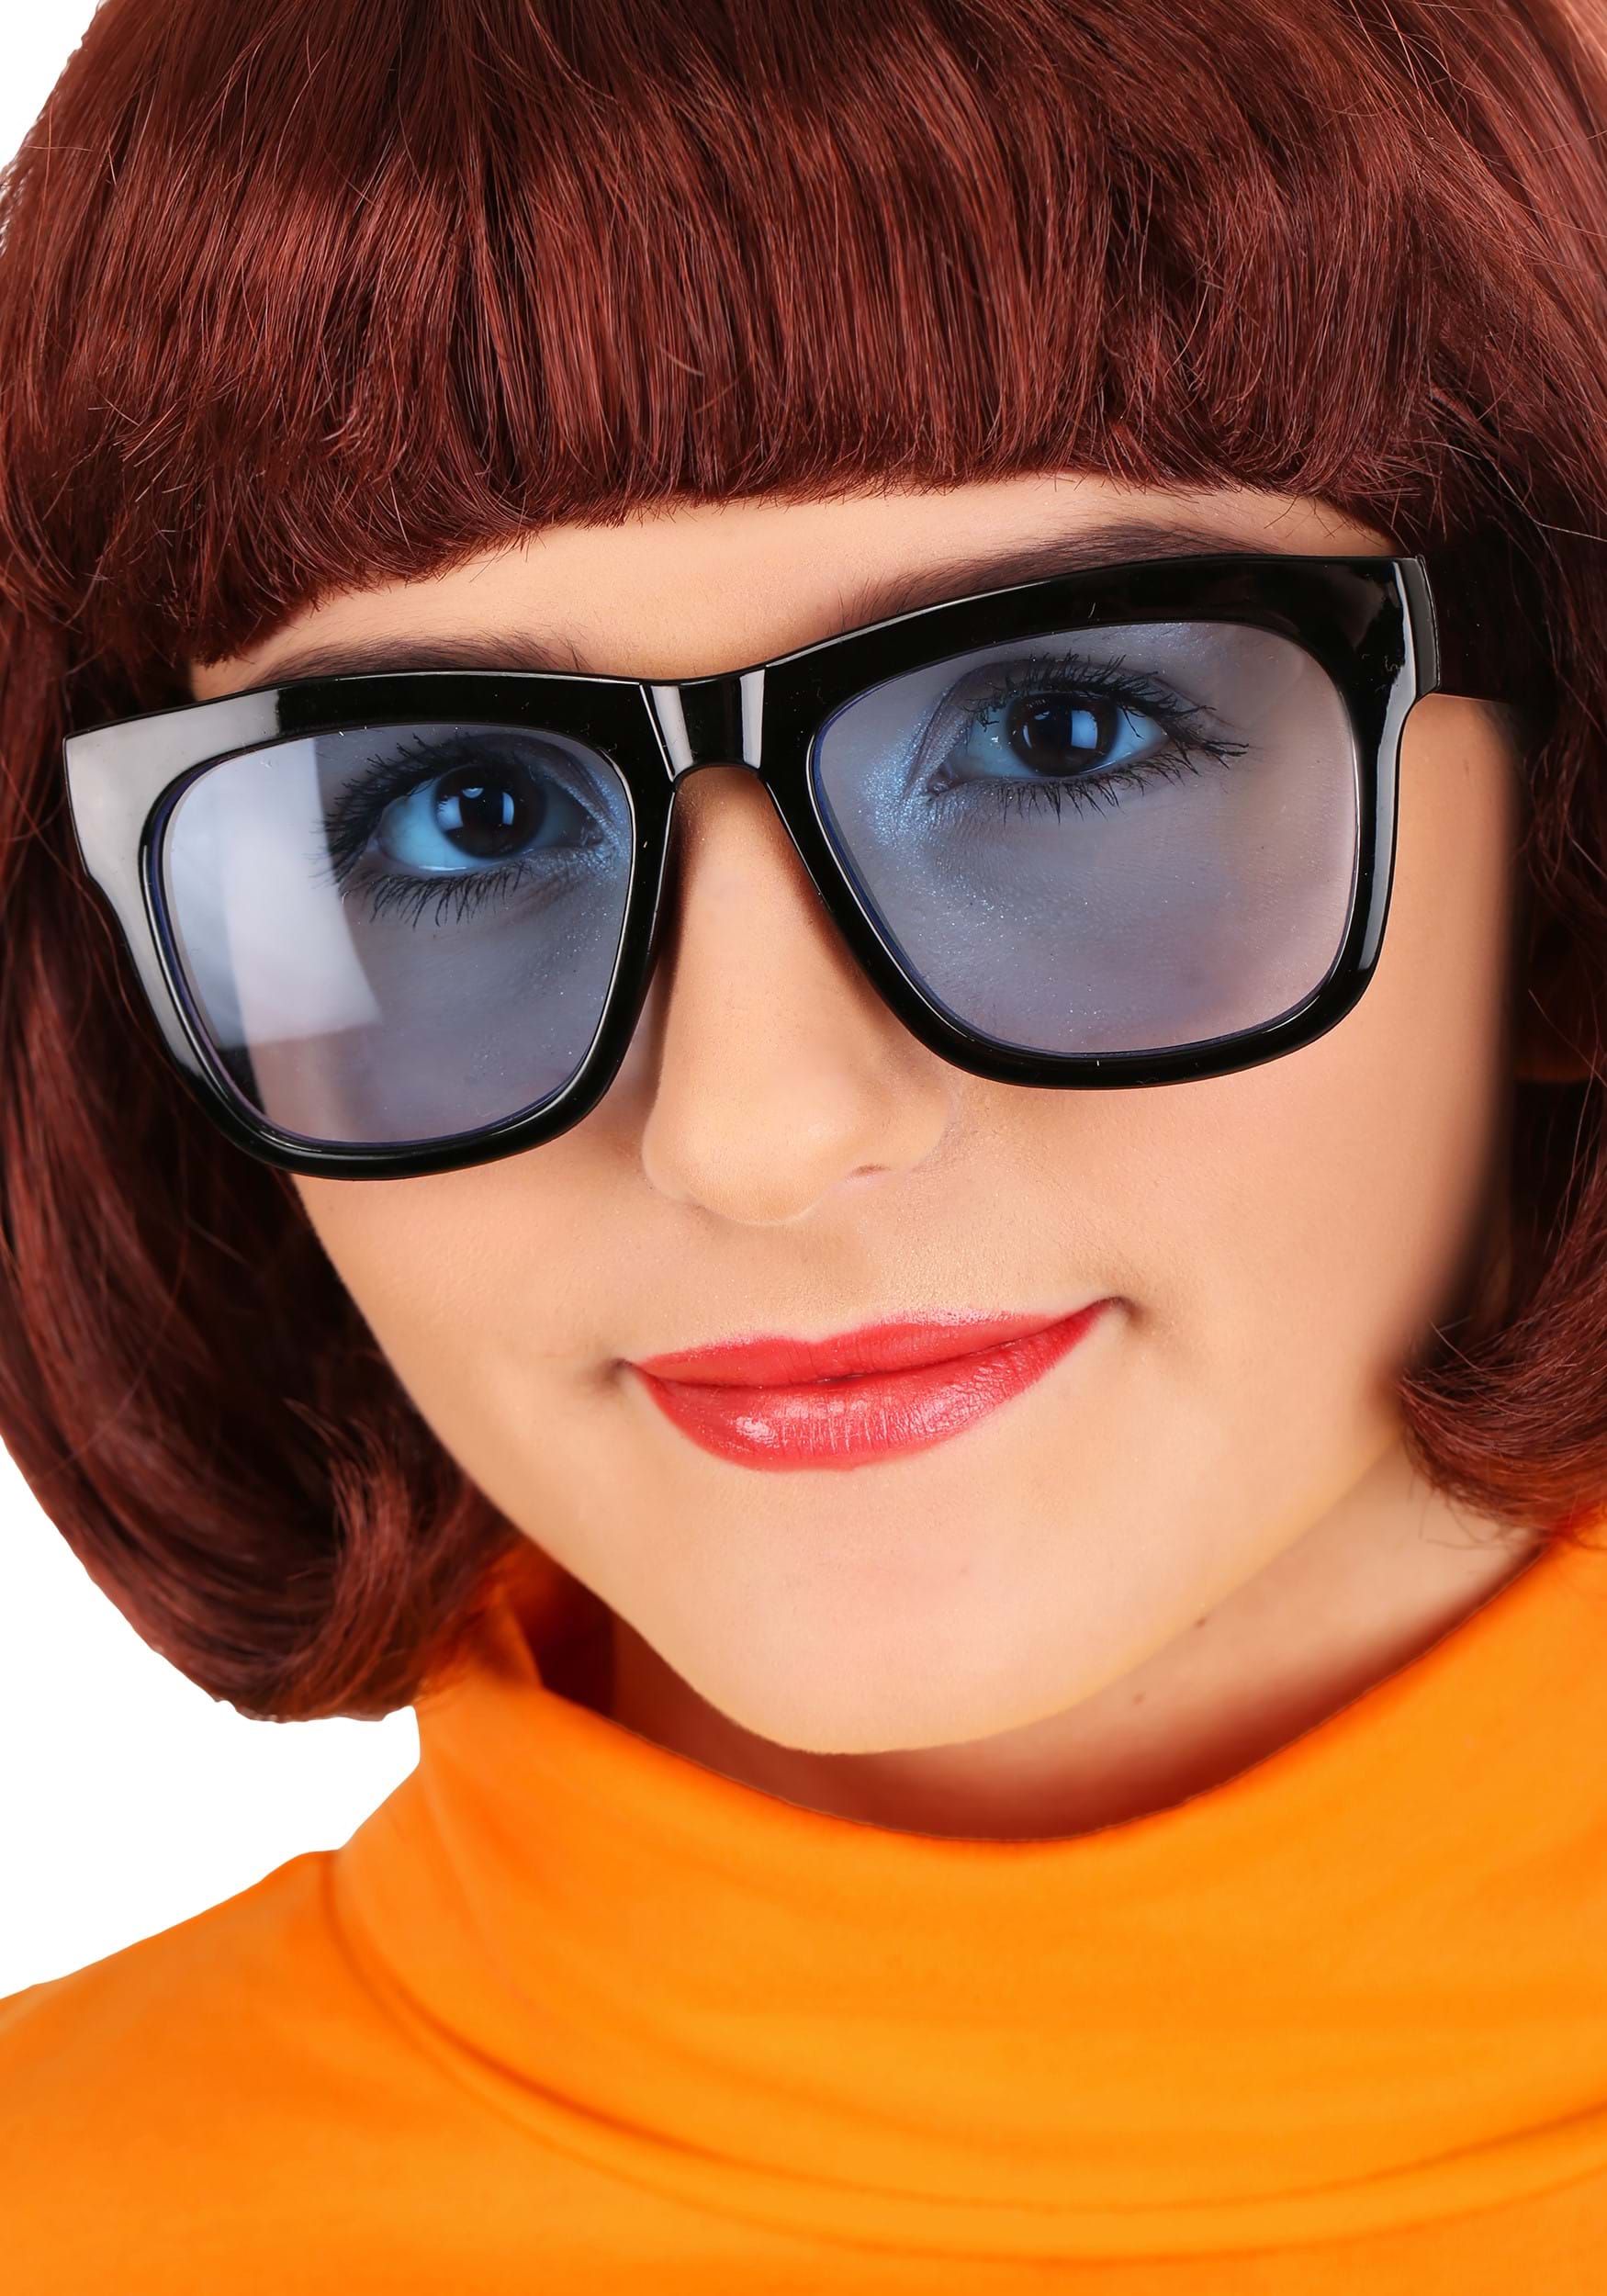  ZOKJFDK Velma Costume for Adult Women Halloween Classic Movie  Characters Costume Daphne Costume Adult Women for Cosplay : Clothing, Shoes